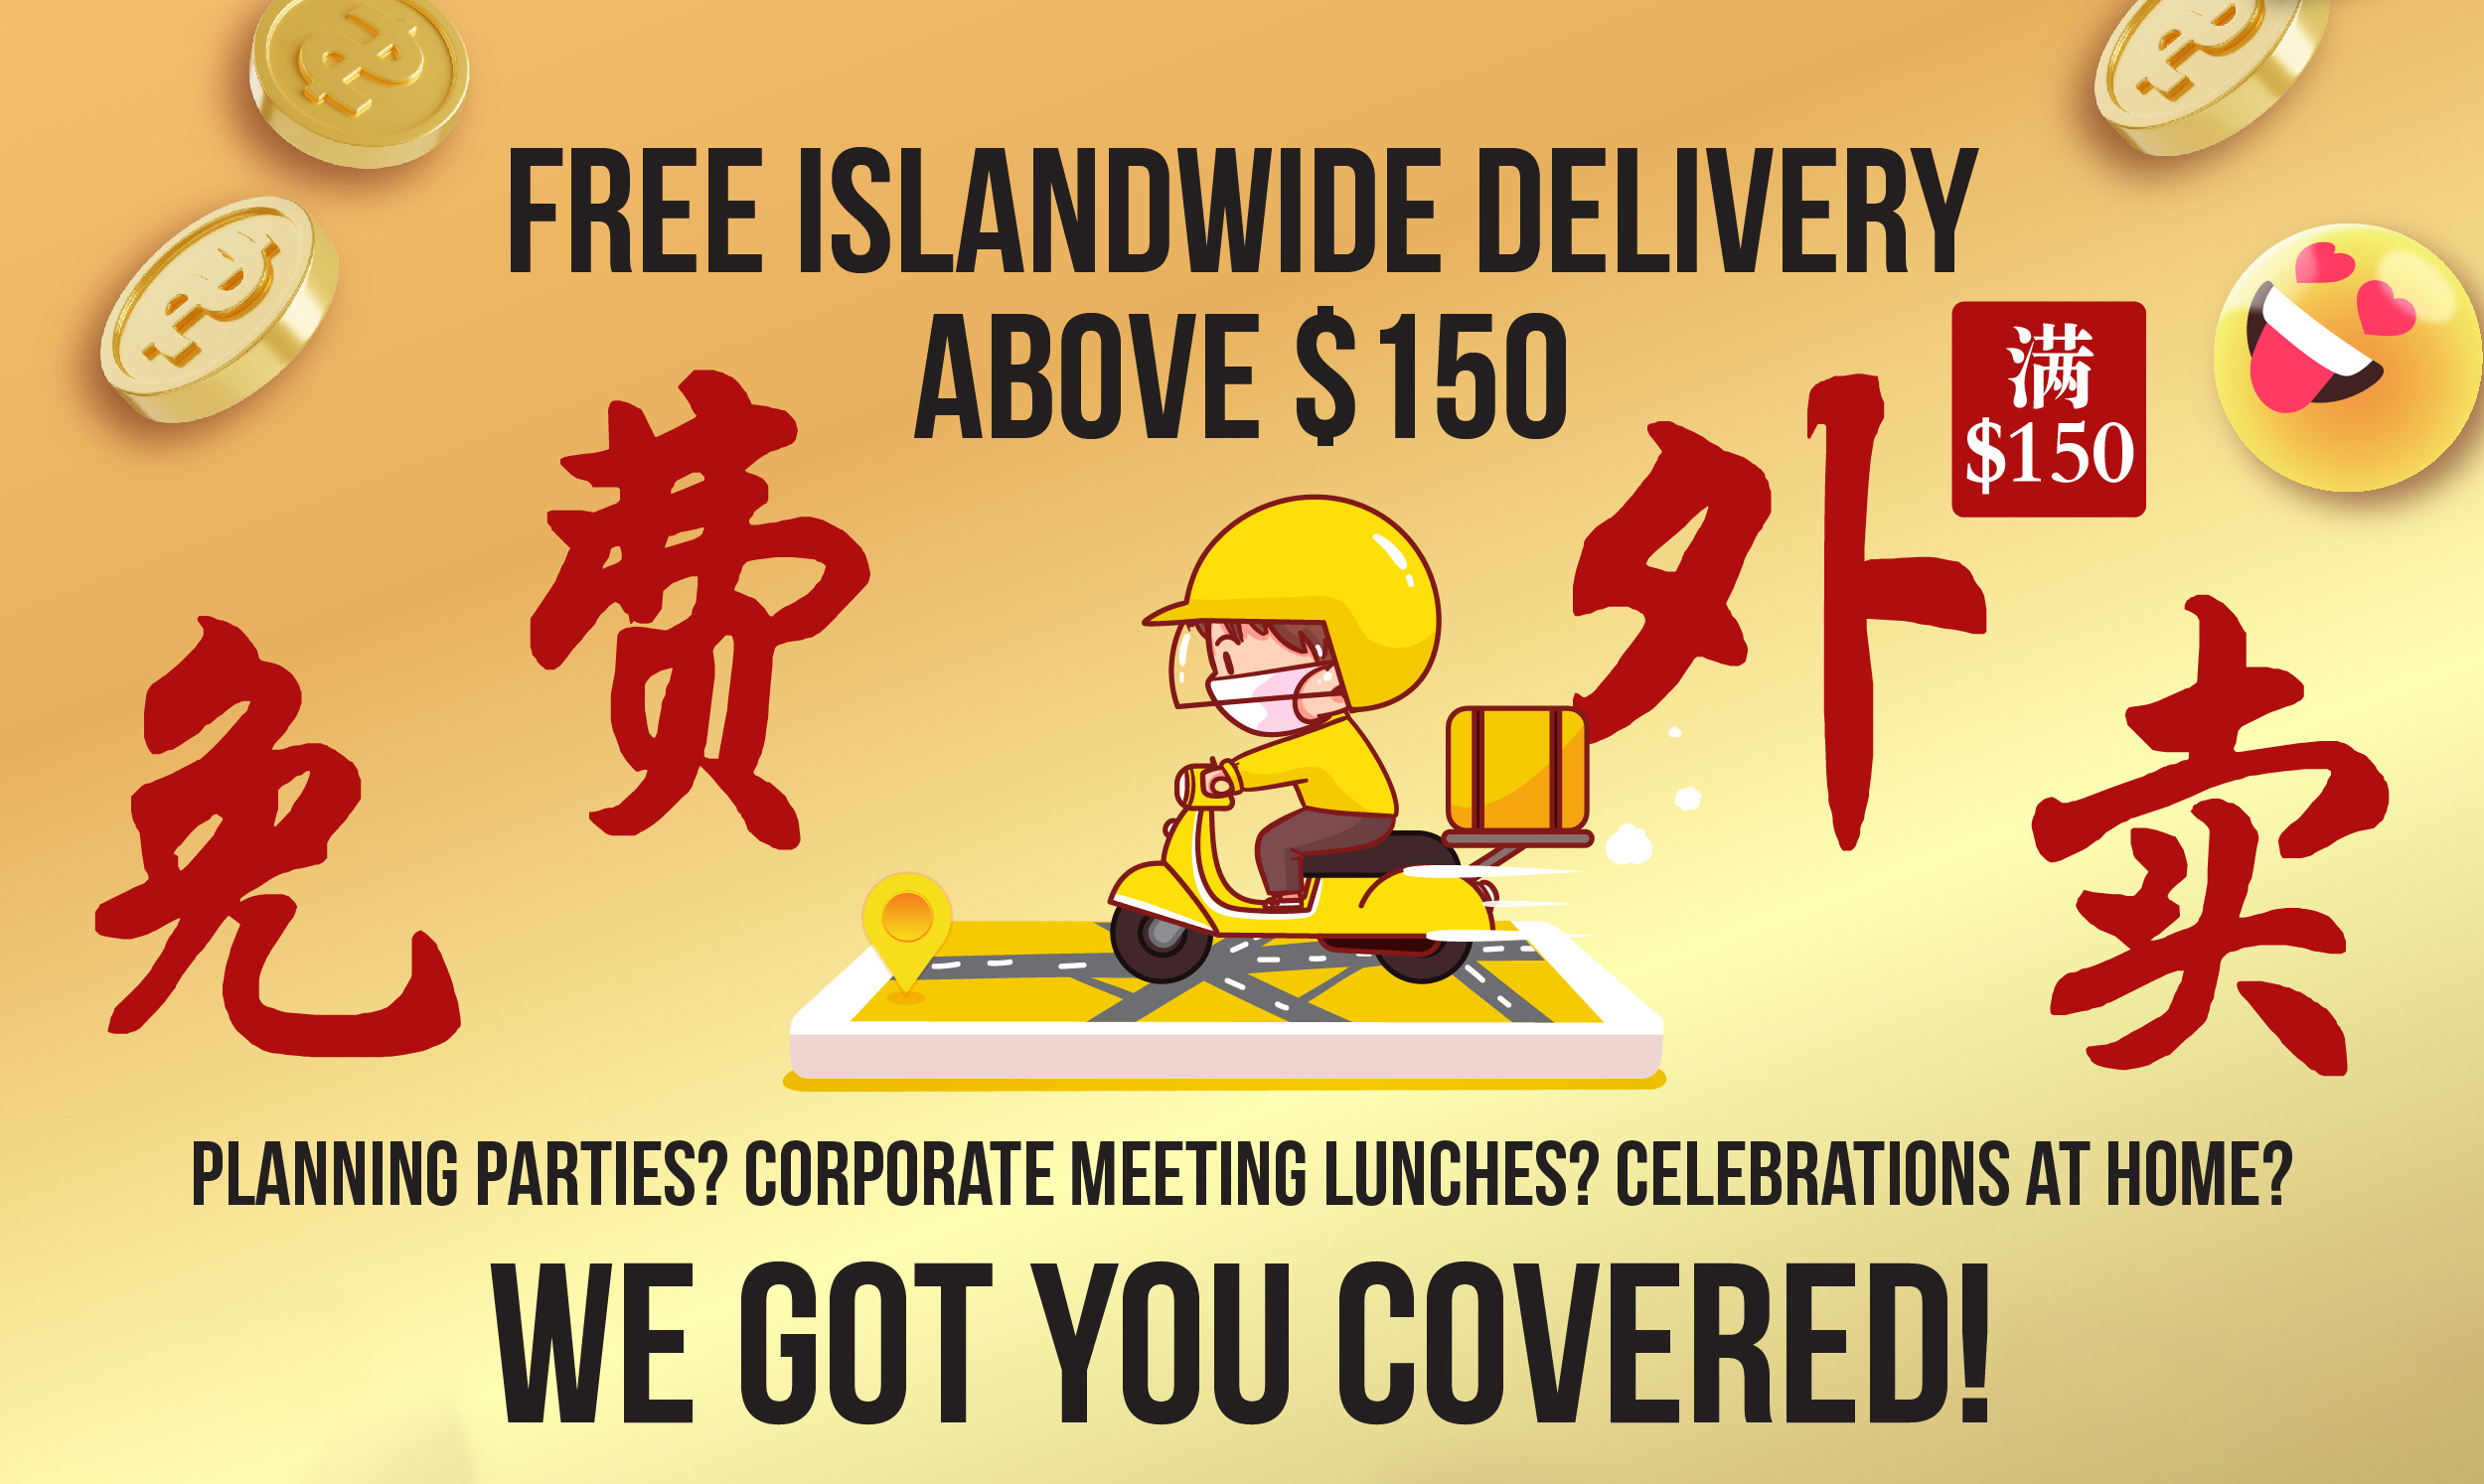 FREE ISLANDWIDE DELIVERY ABOVE $150! WE GOT YOU COVERED!!